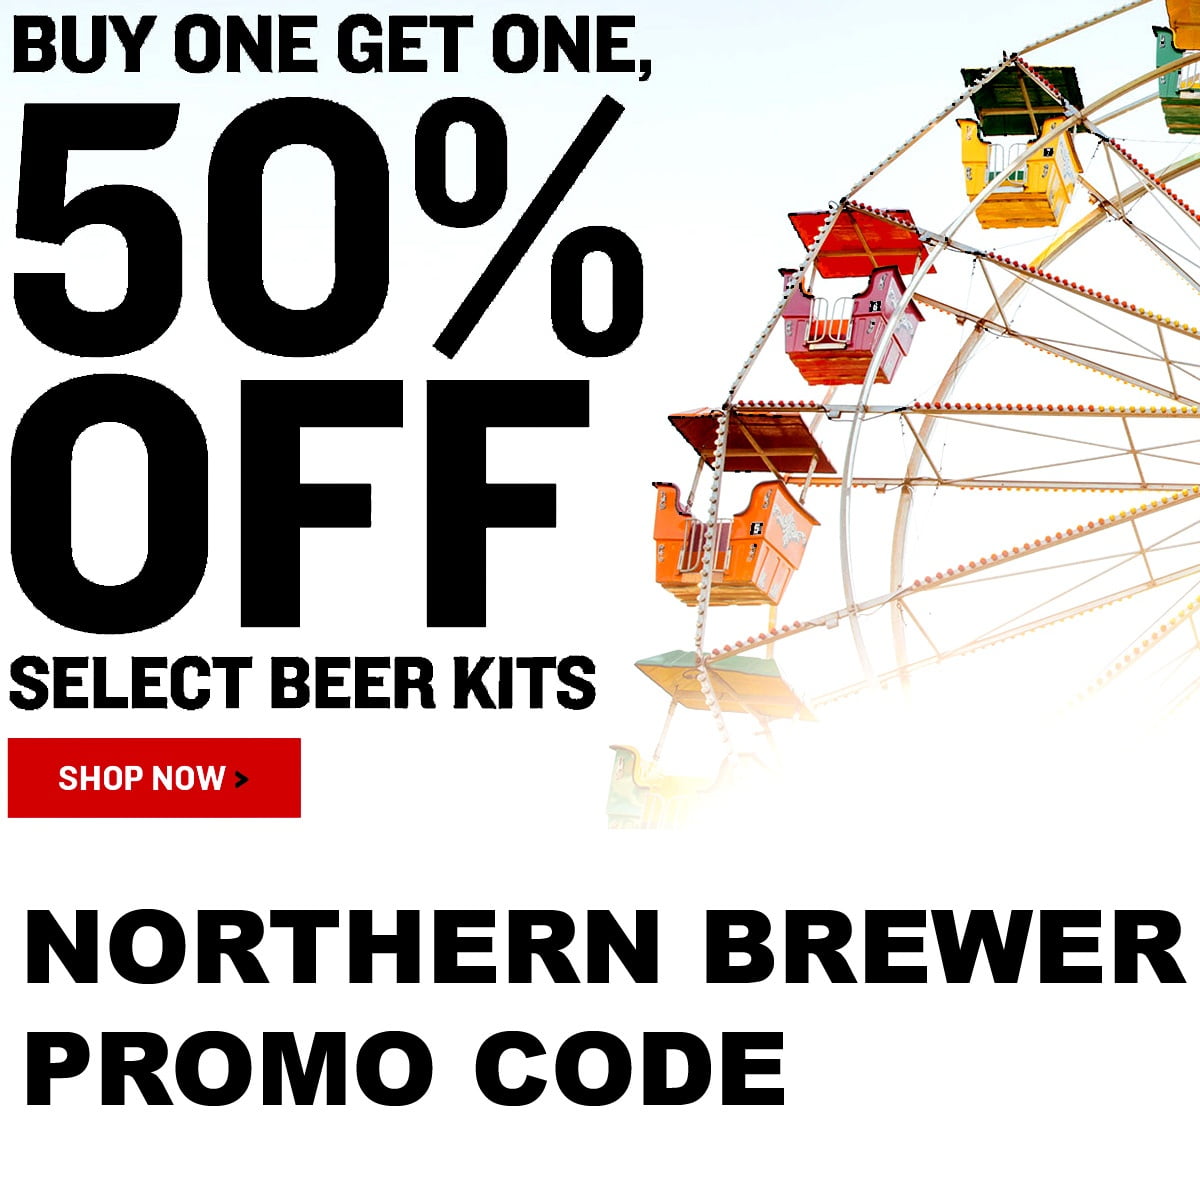 New Northern Brewer Promo Codes For June 2019